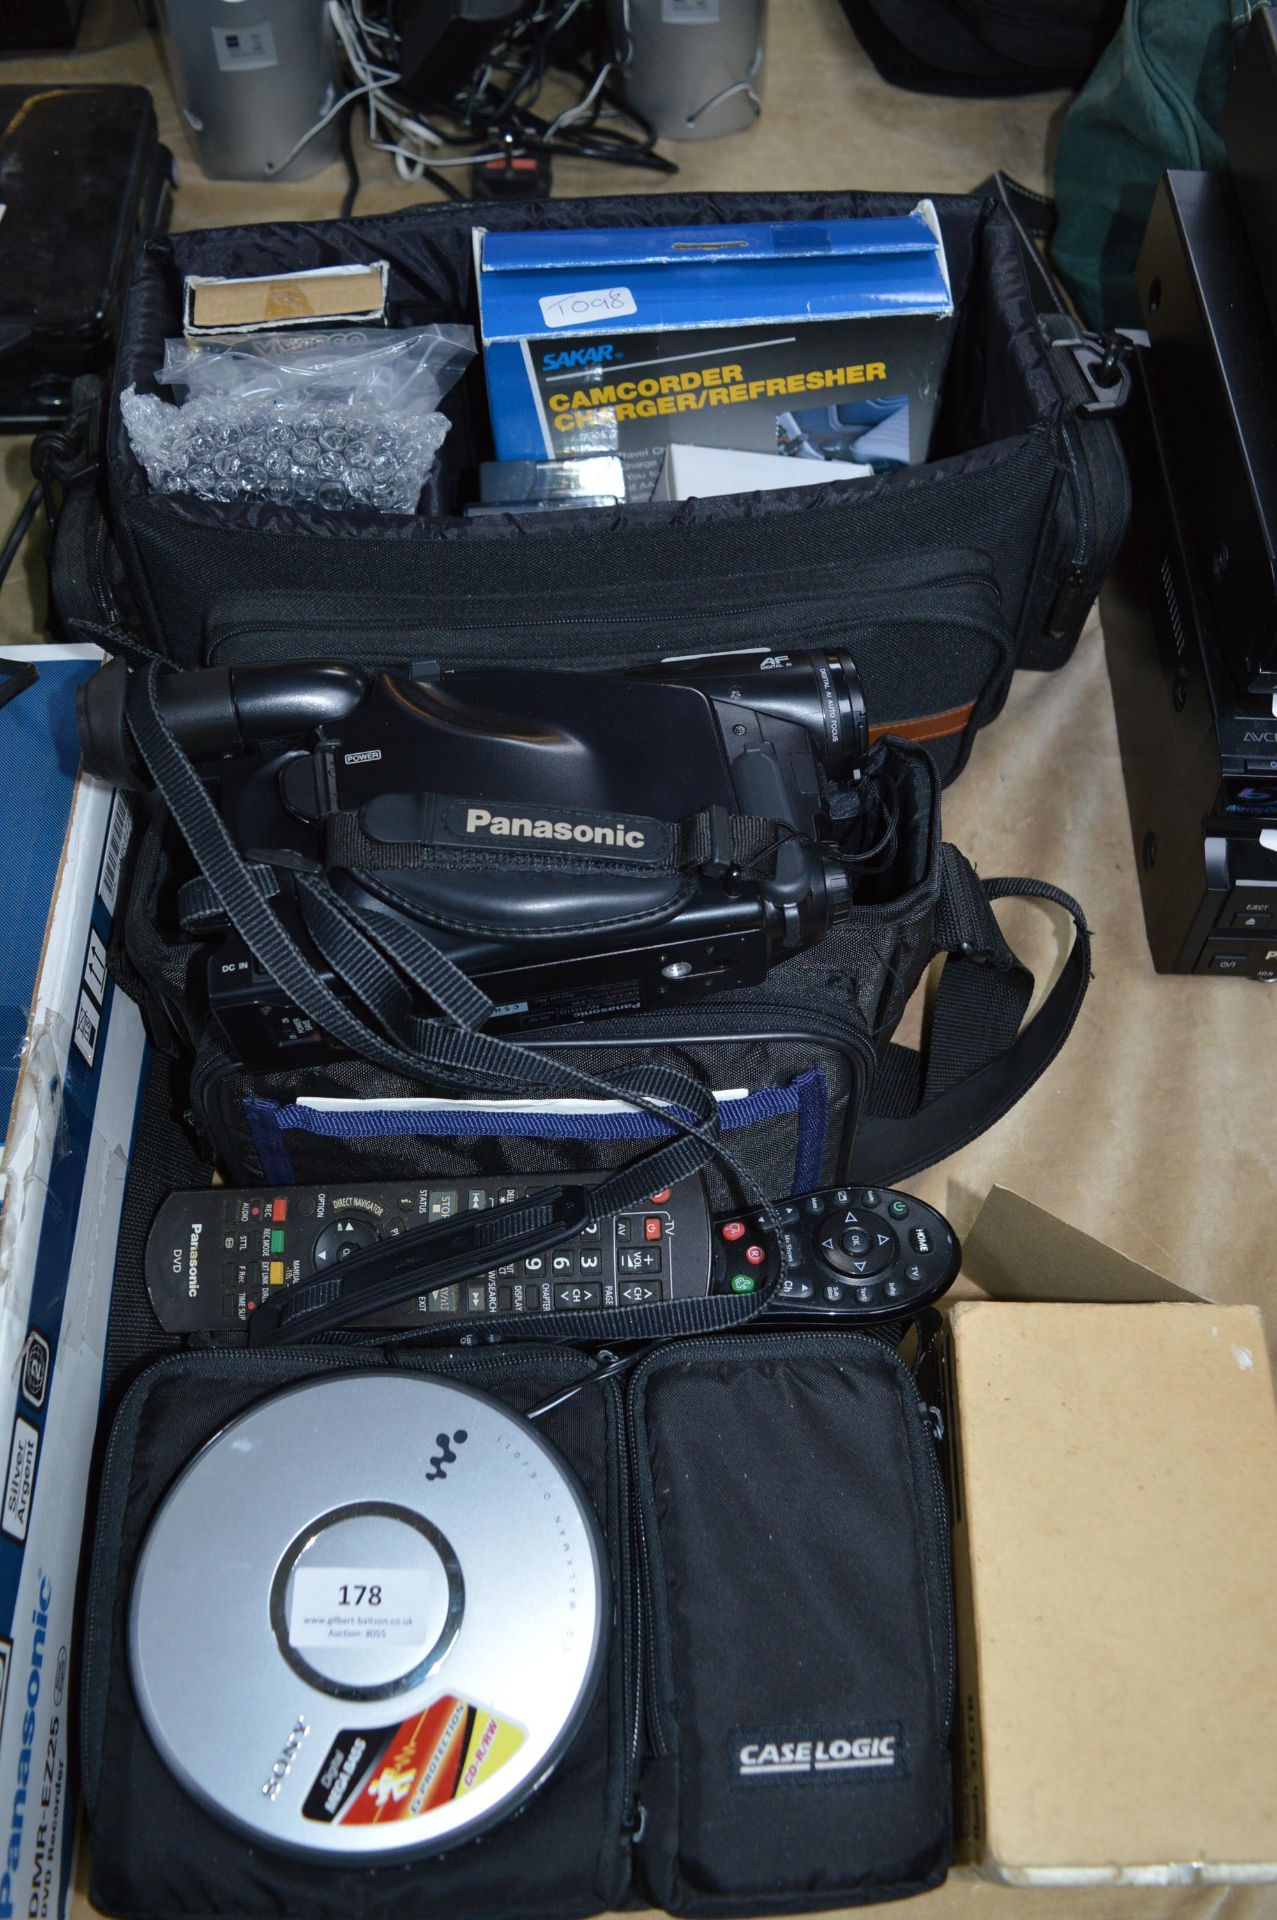 Assortment of Camcorder Equipment, Bags, and Sony